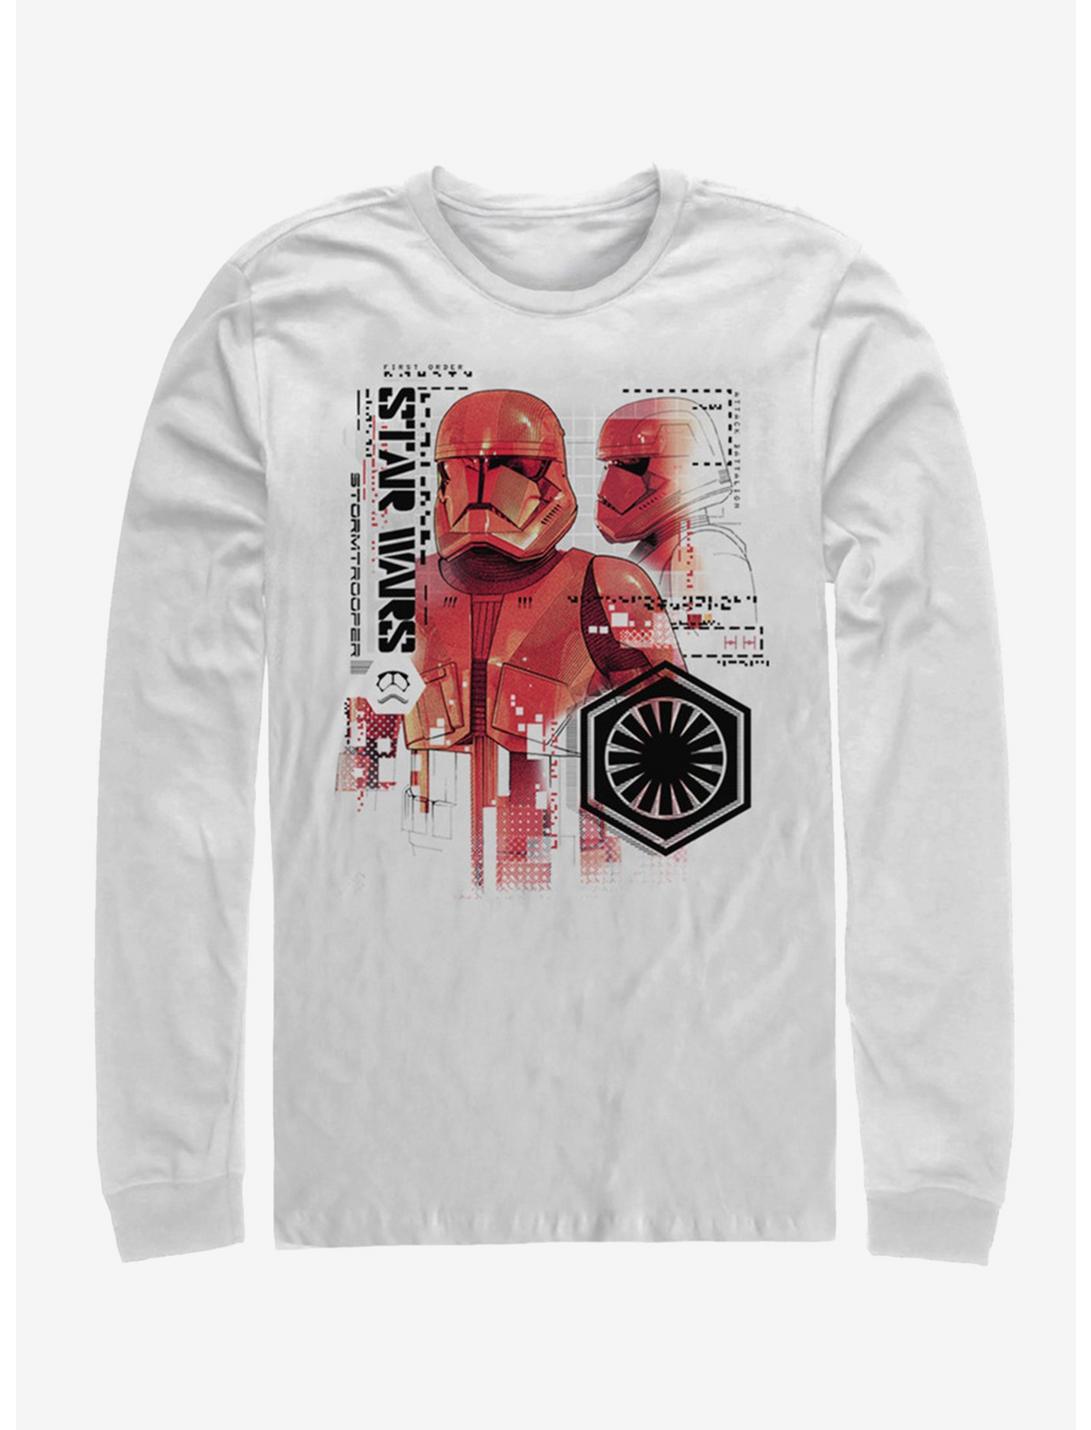 Star Wars Episode IX The Rise Of Skywalker Red Trooper Schematic Long-Sleeve T-Shirt, WHITE, hi-res